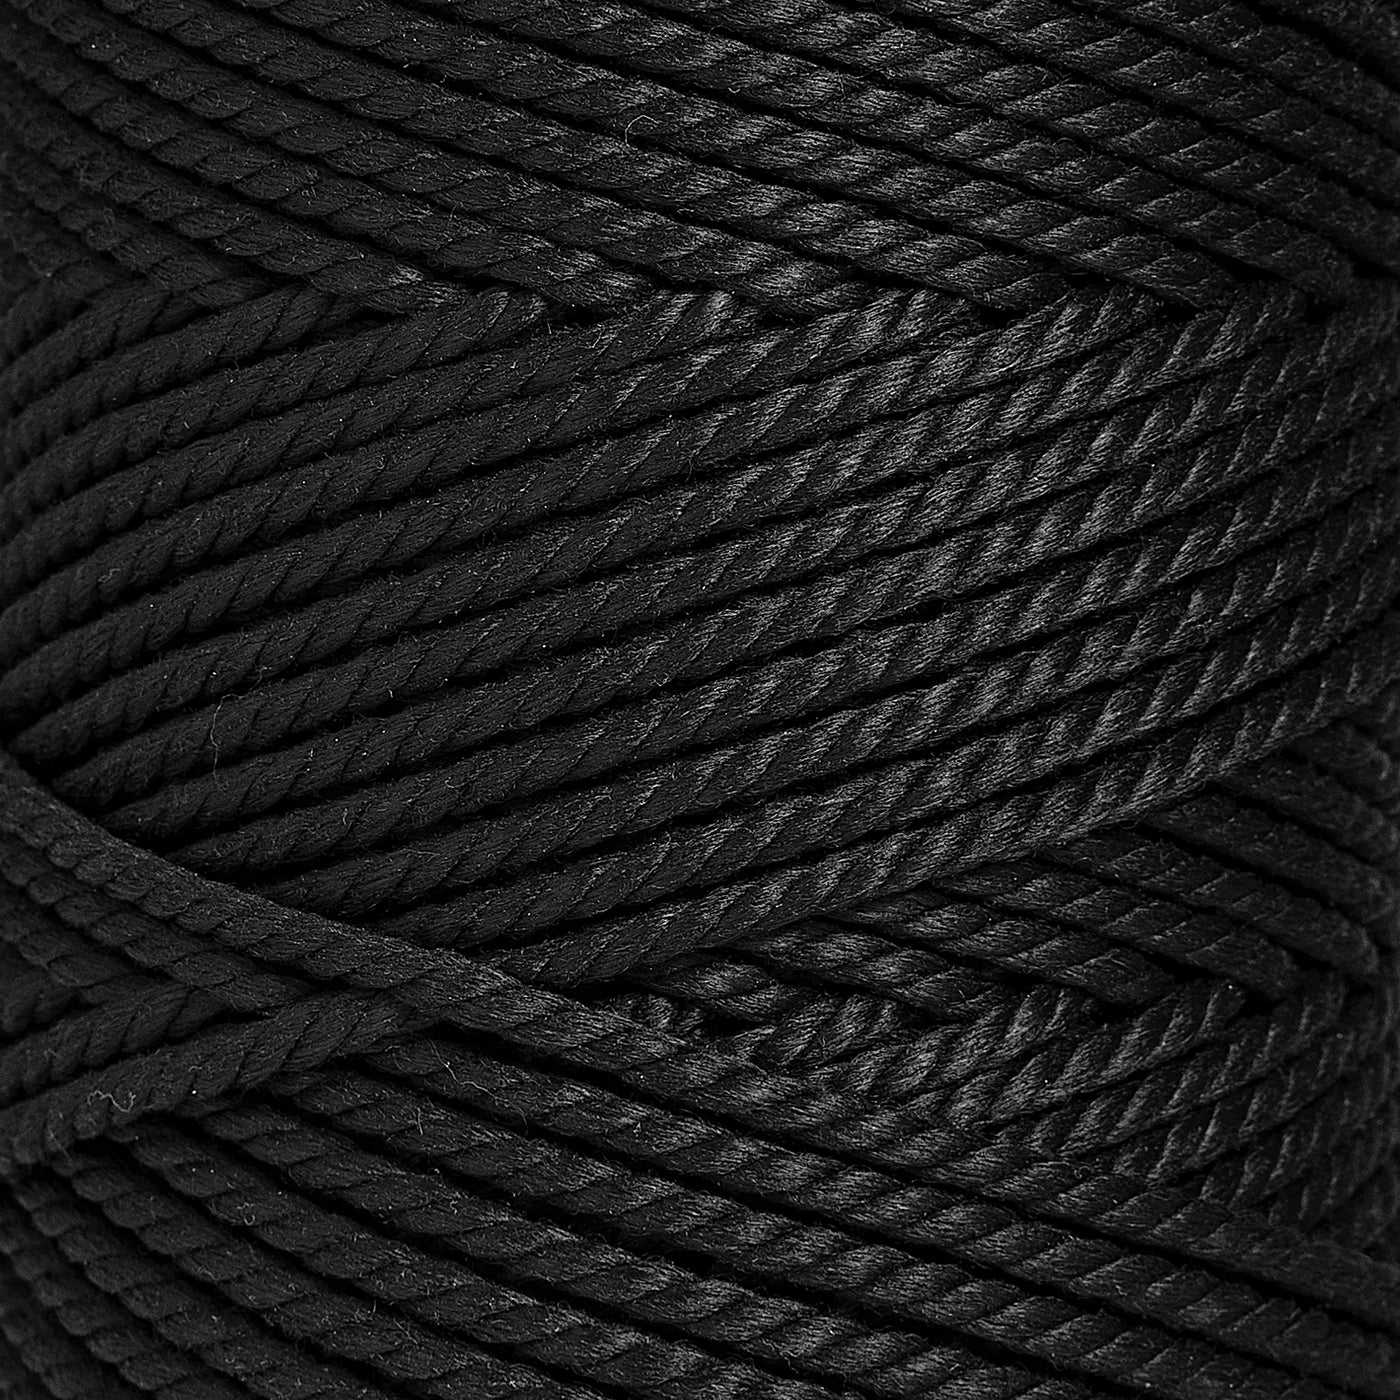 OUTDOOR RECYCLED CORD 3 MM - 3 PLY -  BLACK COLOR